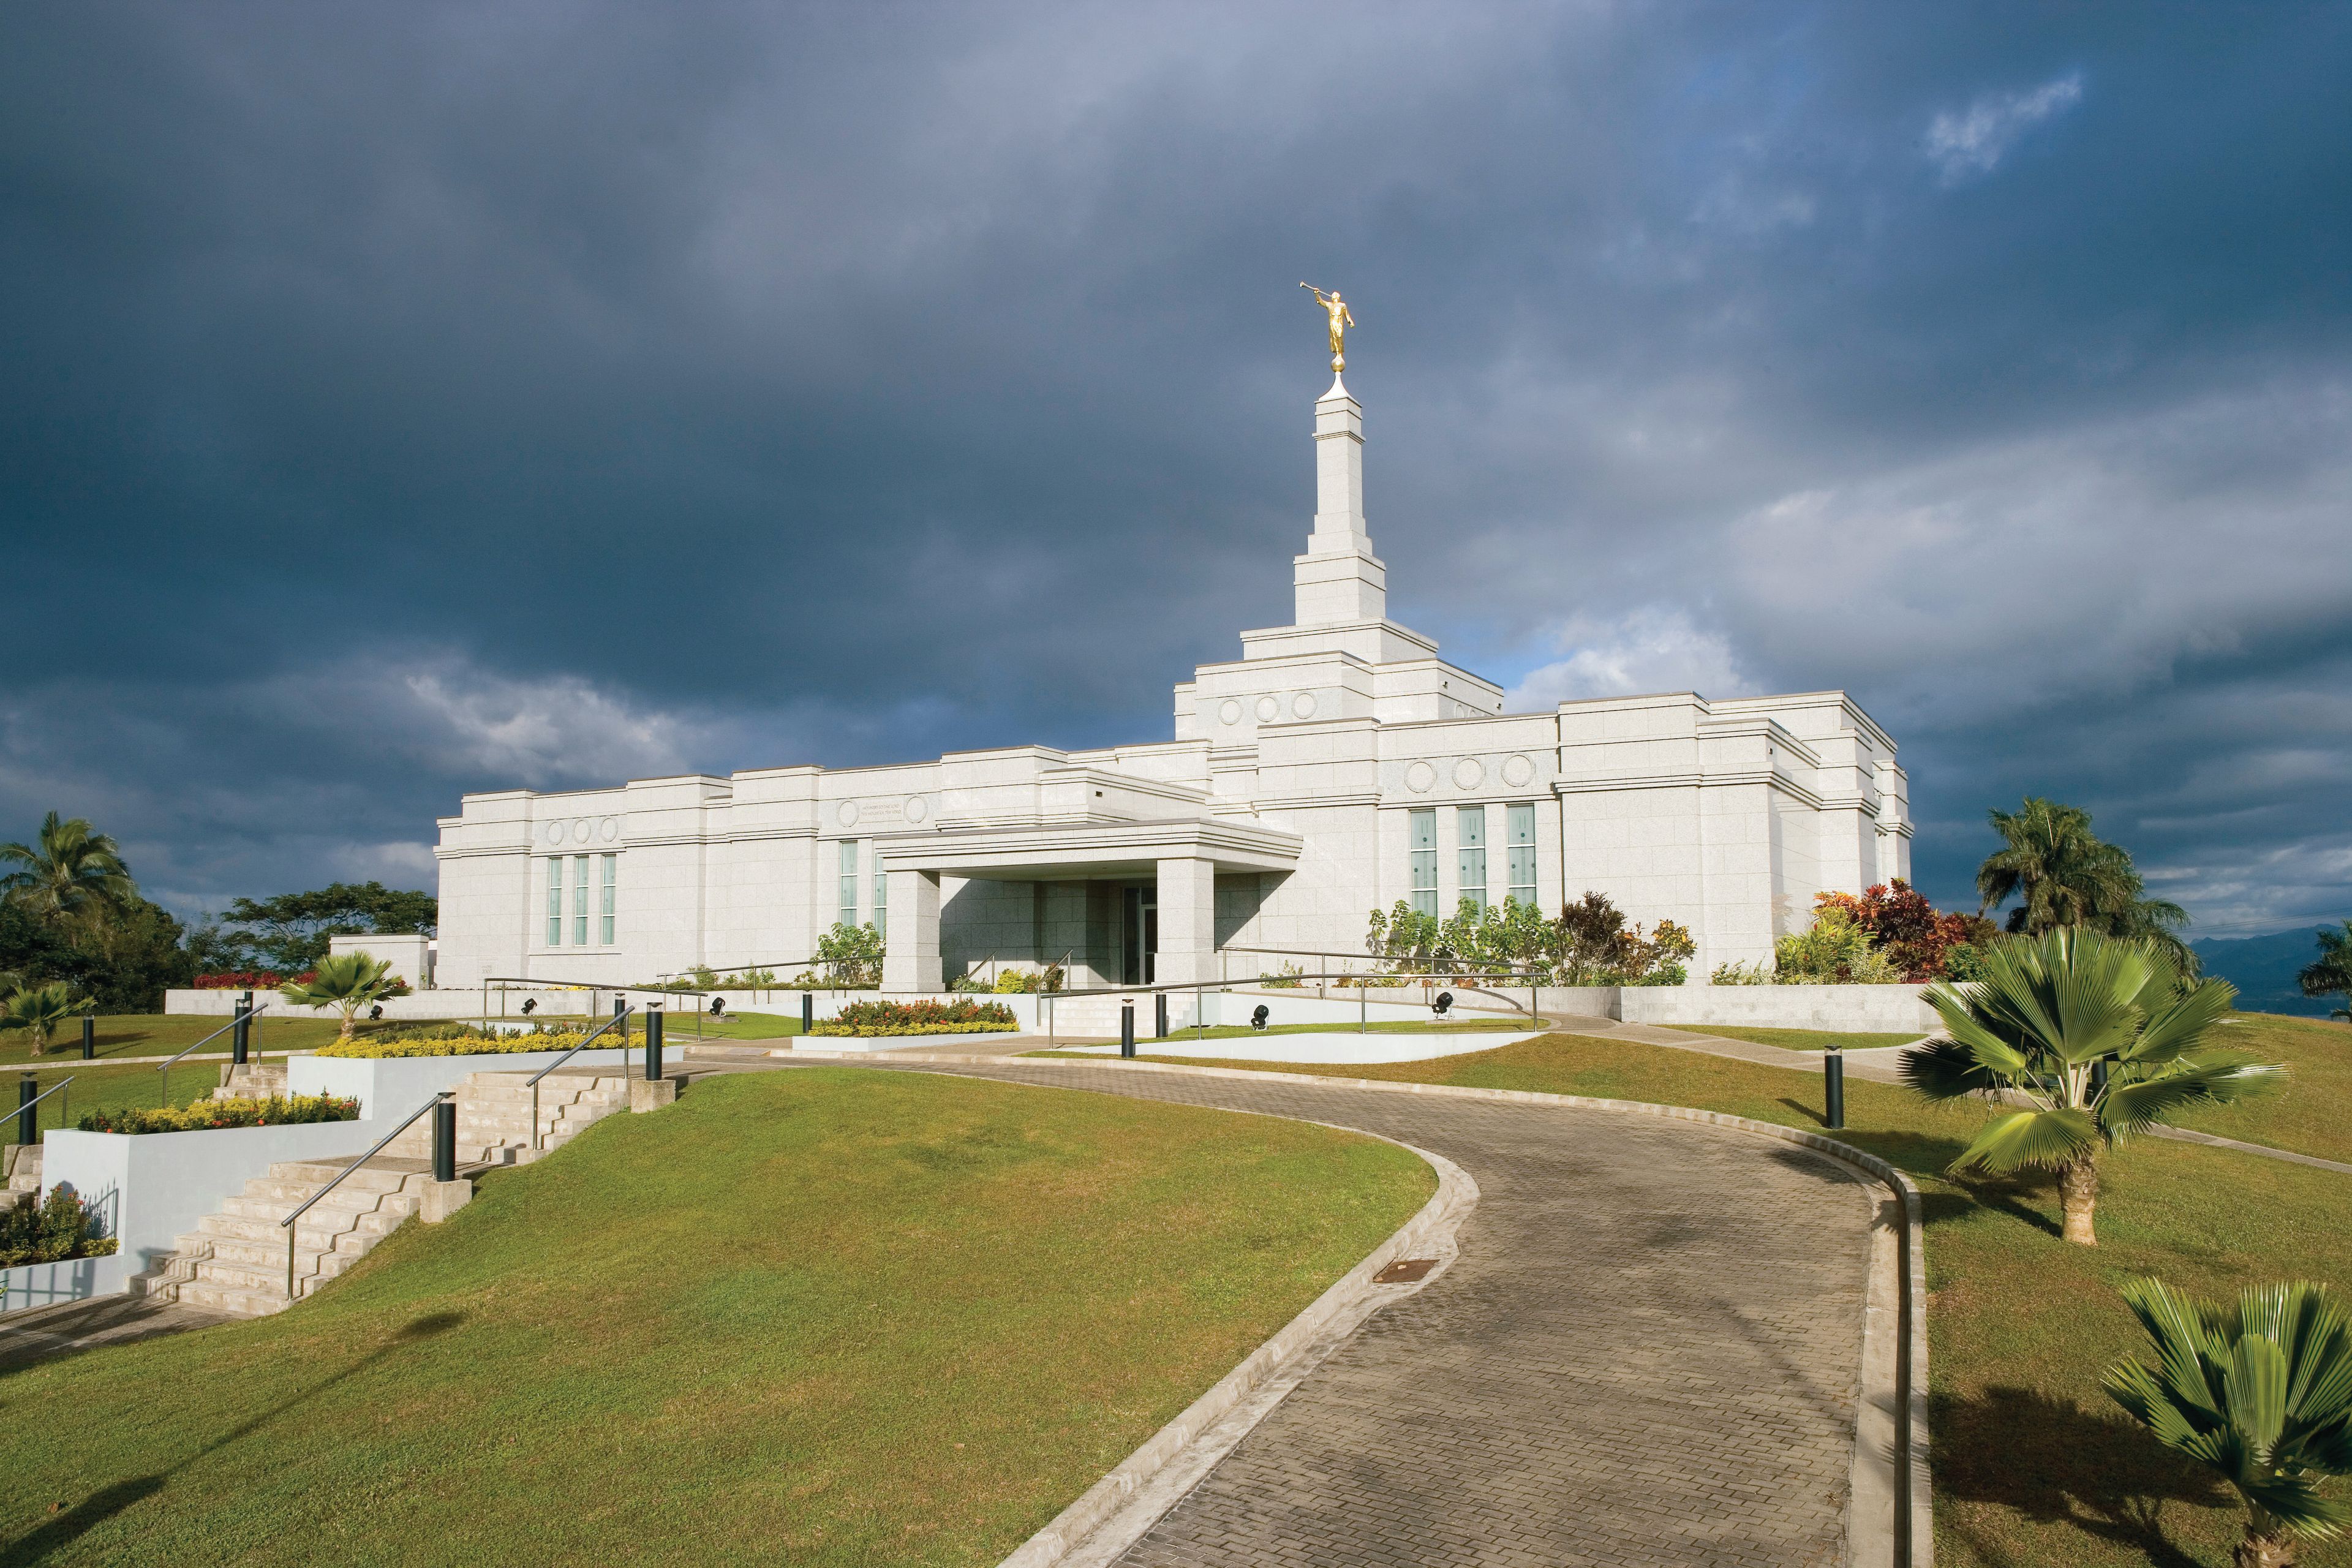 The entire Suva Fiji Temple, including the entrance and scenery.